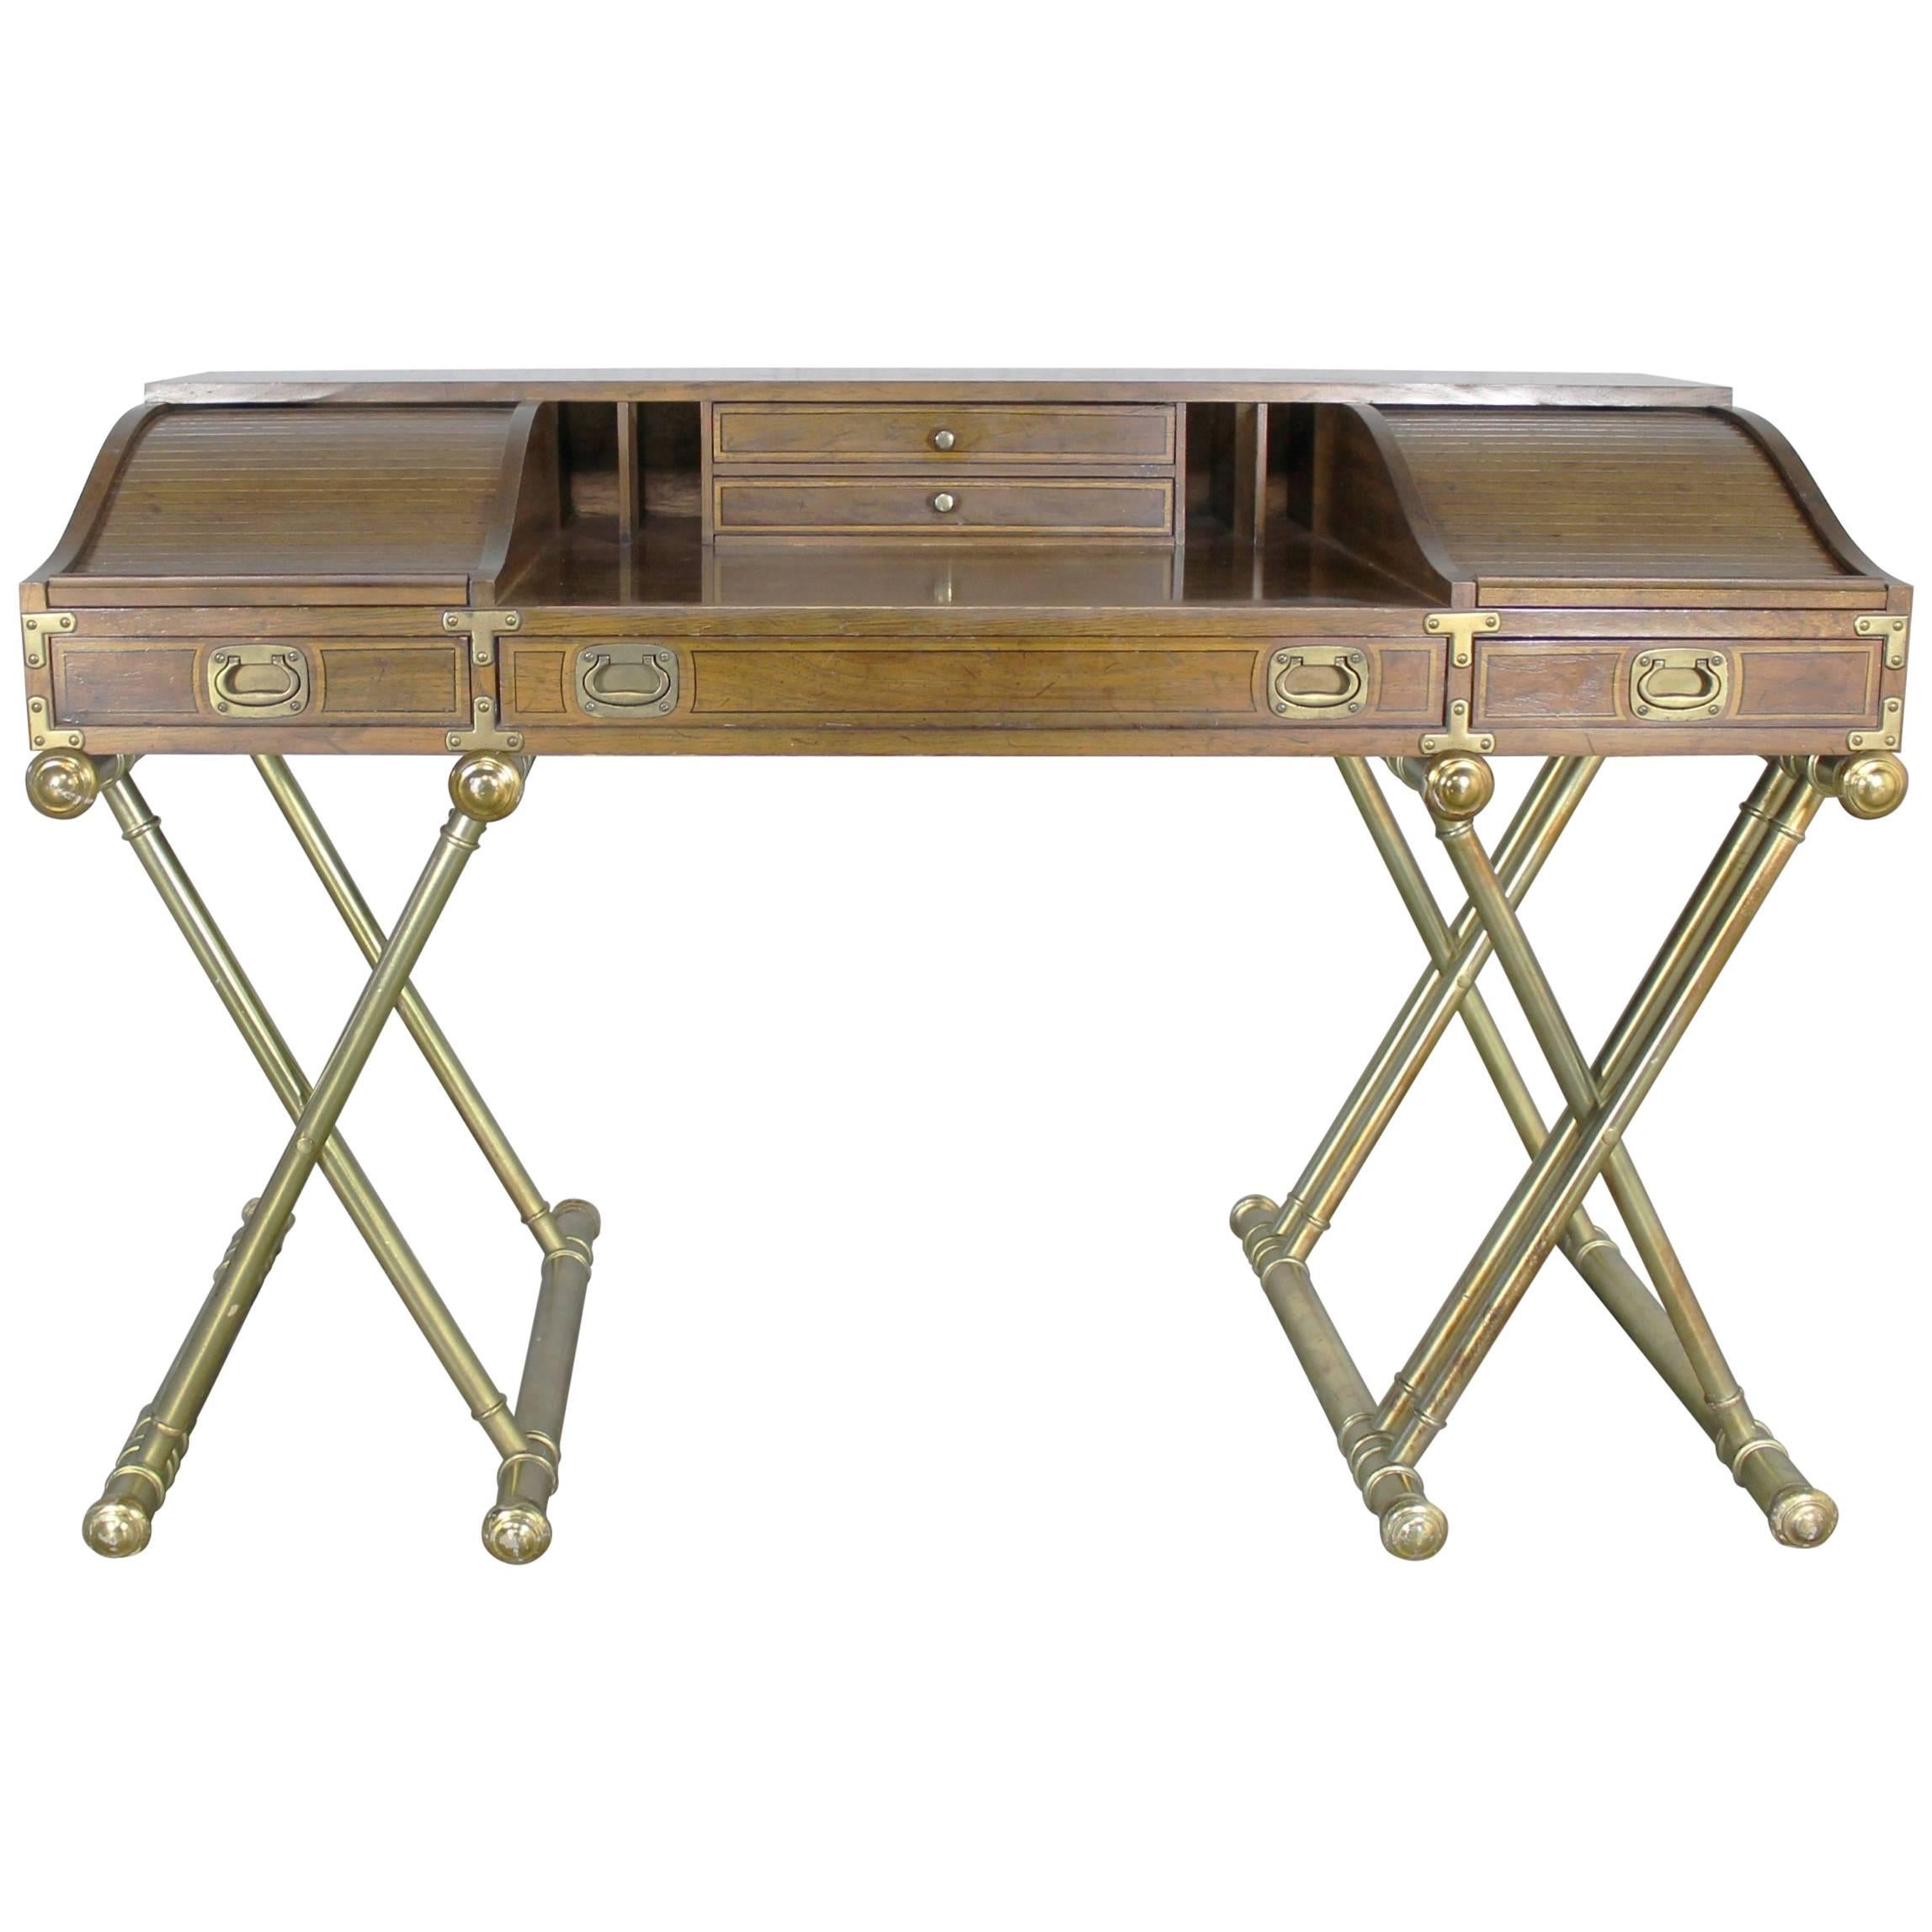 Vintage Drexel Campaign Desk with Gilt X-Base Legs and Low Roll Top